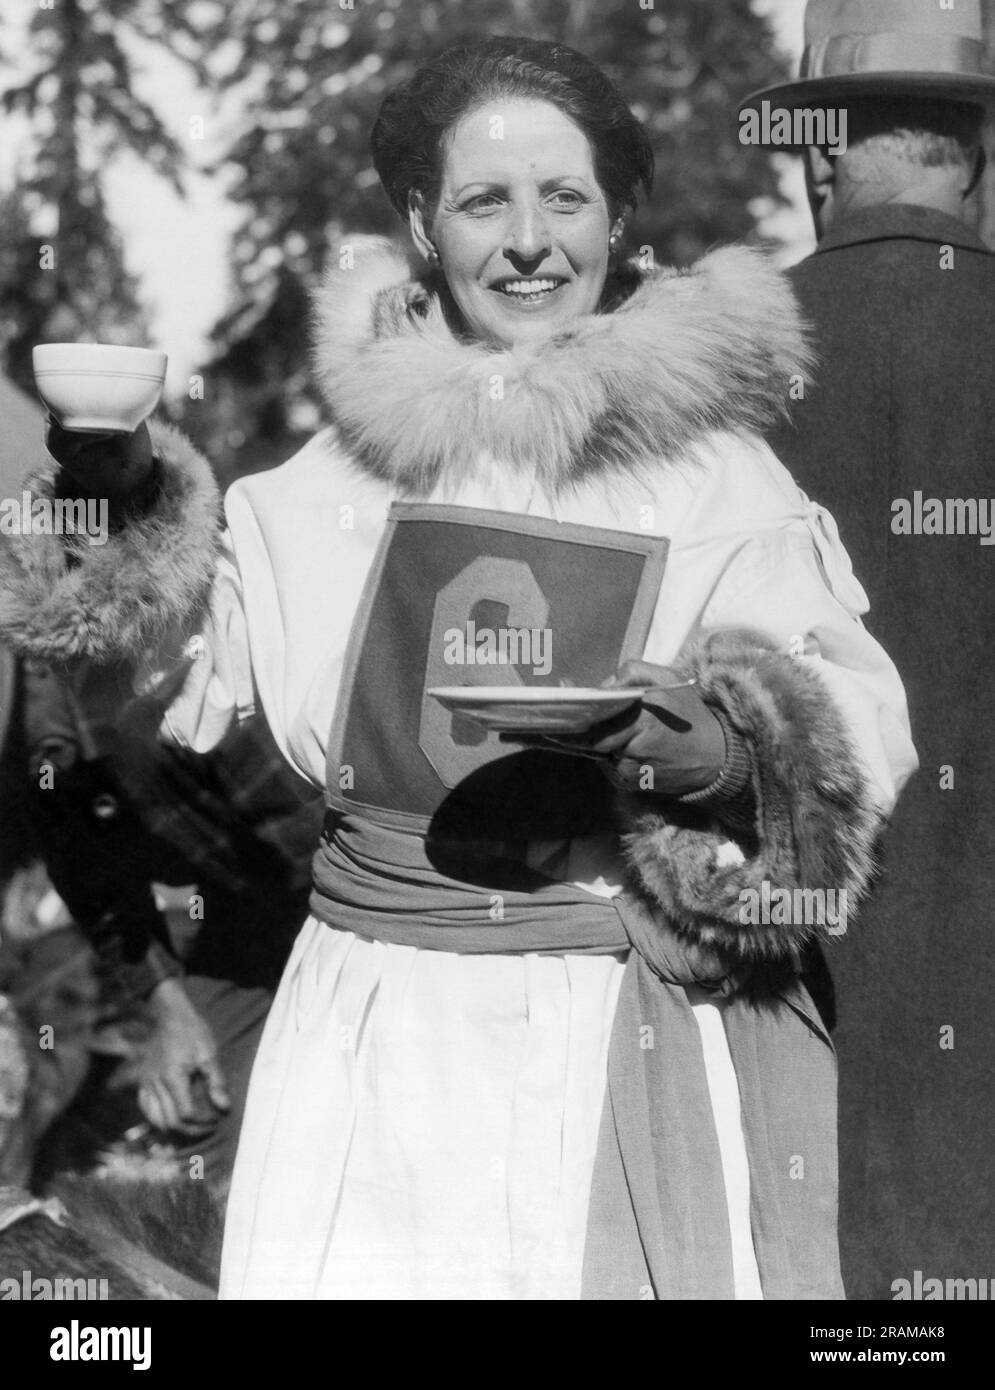 Ashton, Idaho:  c. 1928 Lydia 'Whistling Lyd' Hutchinson, sled dog racer who is noted for training her dogs by whistling at them rather than using vocal commands. Here she is holding up the coveted 'Kaw-fee Cup' prize that goes to the dog sled race winner. Stock Photo